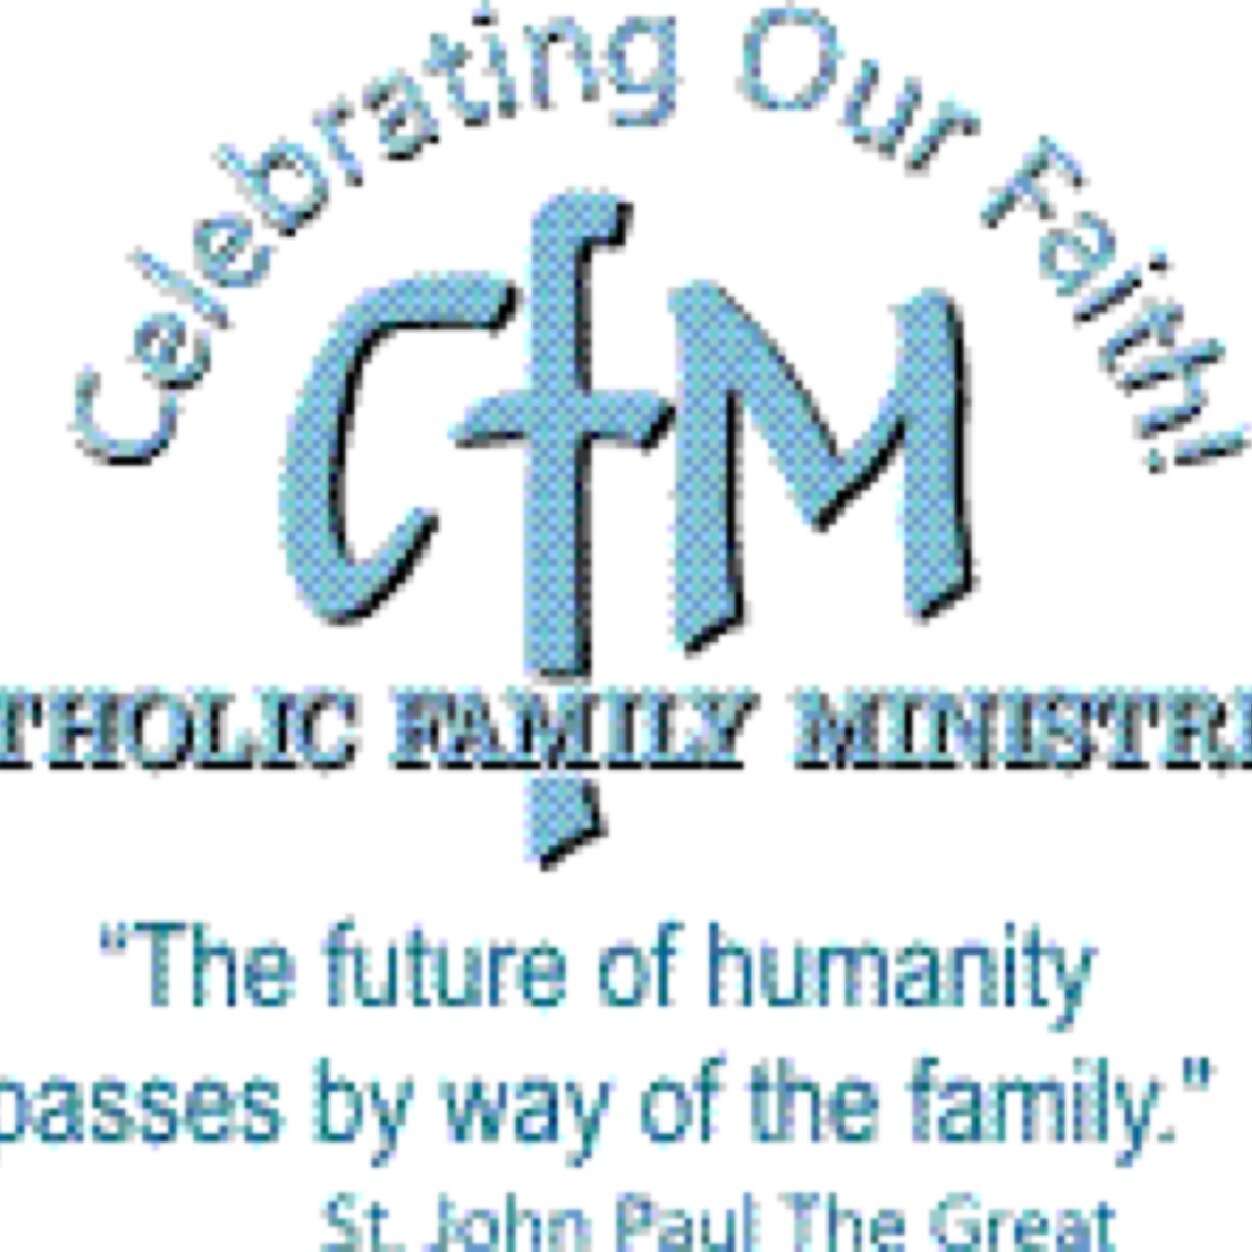 Catholic Family Ministries began in 1995 as the product of prayer and a desire for fruitful Catholic community. We host Catholic conferences in Alberta Canada.